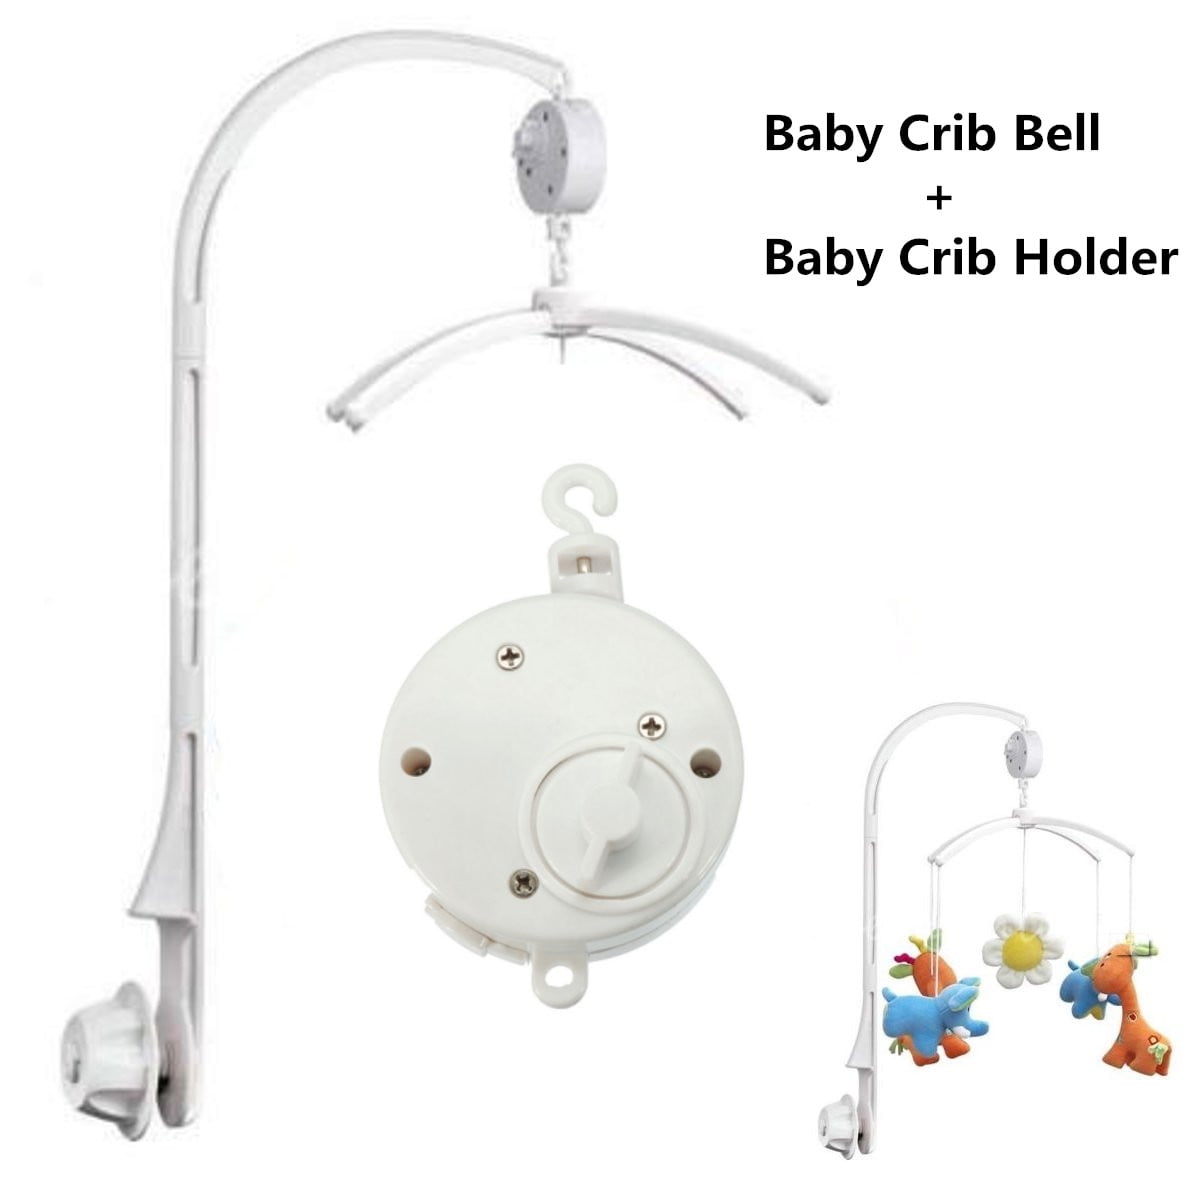 Adjustable Holder DIY Toy Decoration Hanging Arm Bracket Baby Bed Stent Set Nut Screw Kacoco 58cm Baby Crib Claw Mobile Bed Bell Holder with Music Box